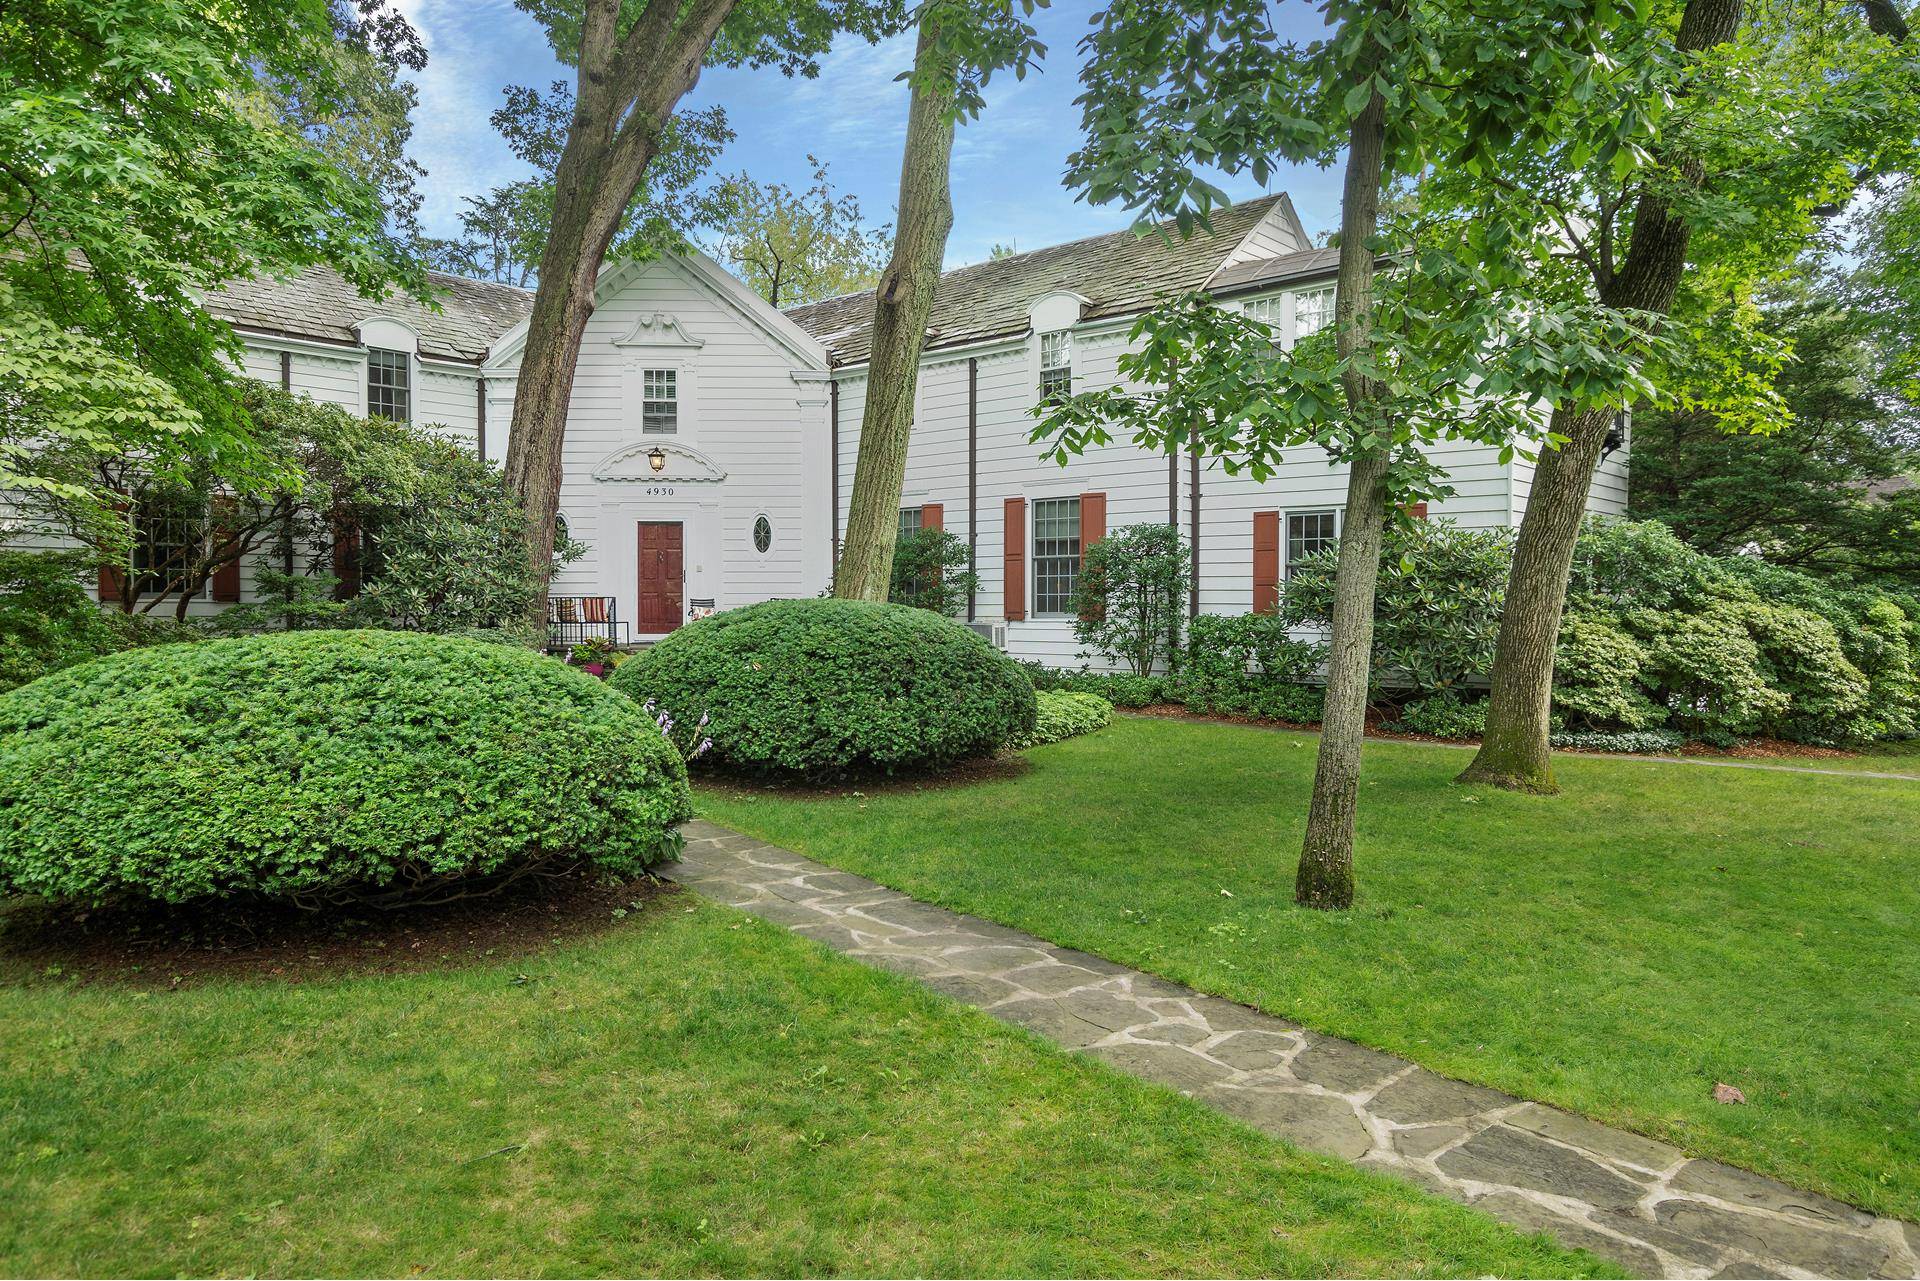 Stunning Colonial Revival home on large corner lot, designed by renowned architect Dwight J.